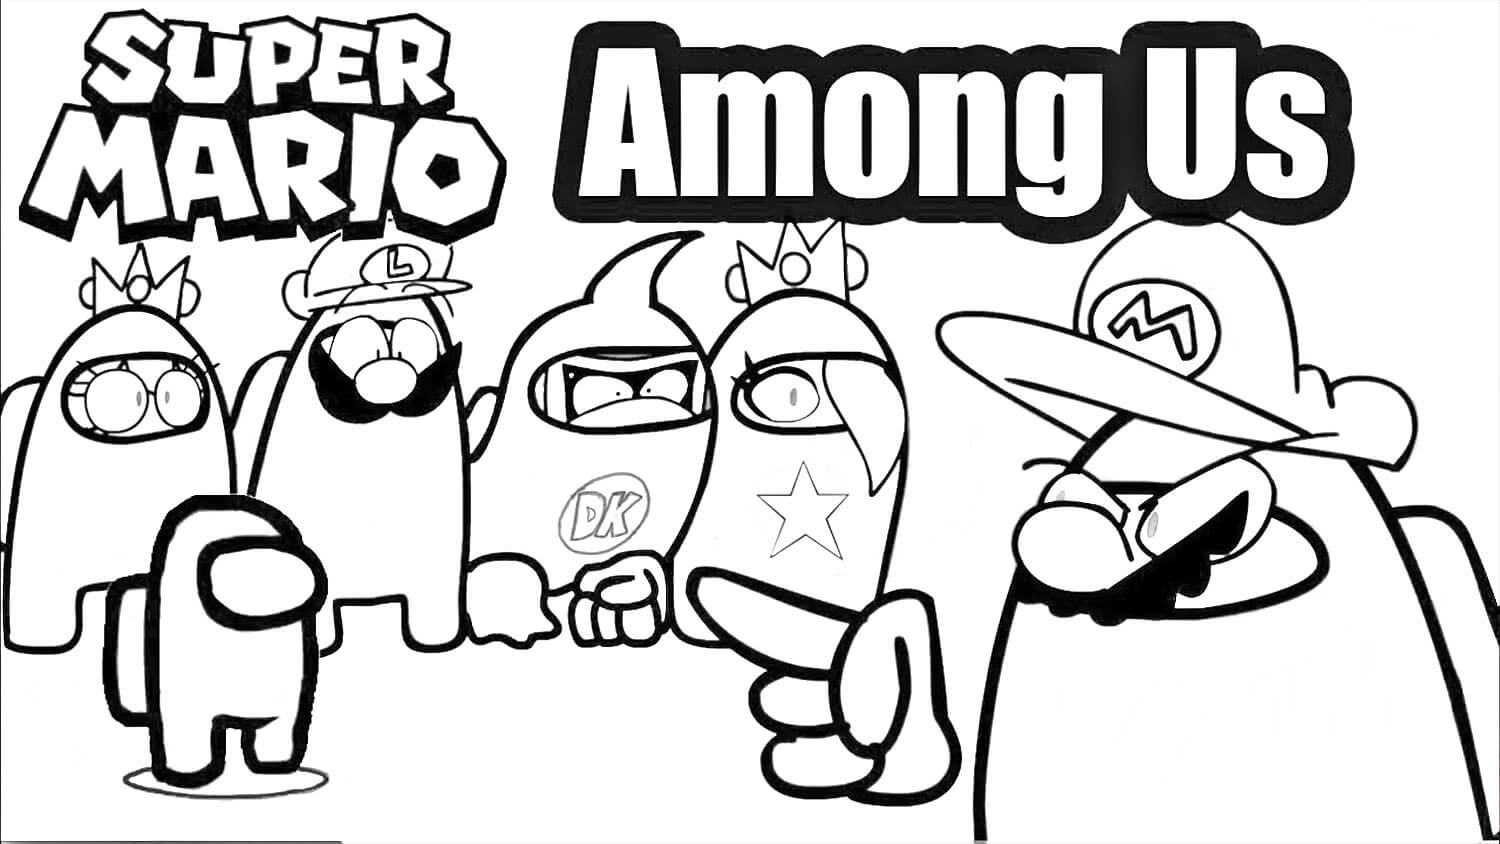 Super Mario Among Us Coloring Page   Free Printable Coloring Pages ...